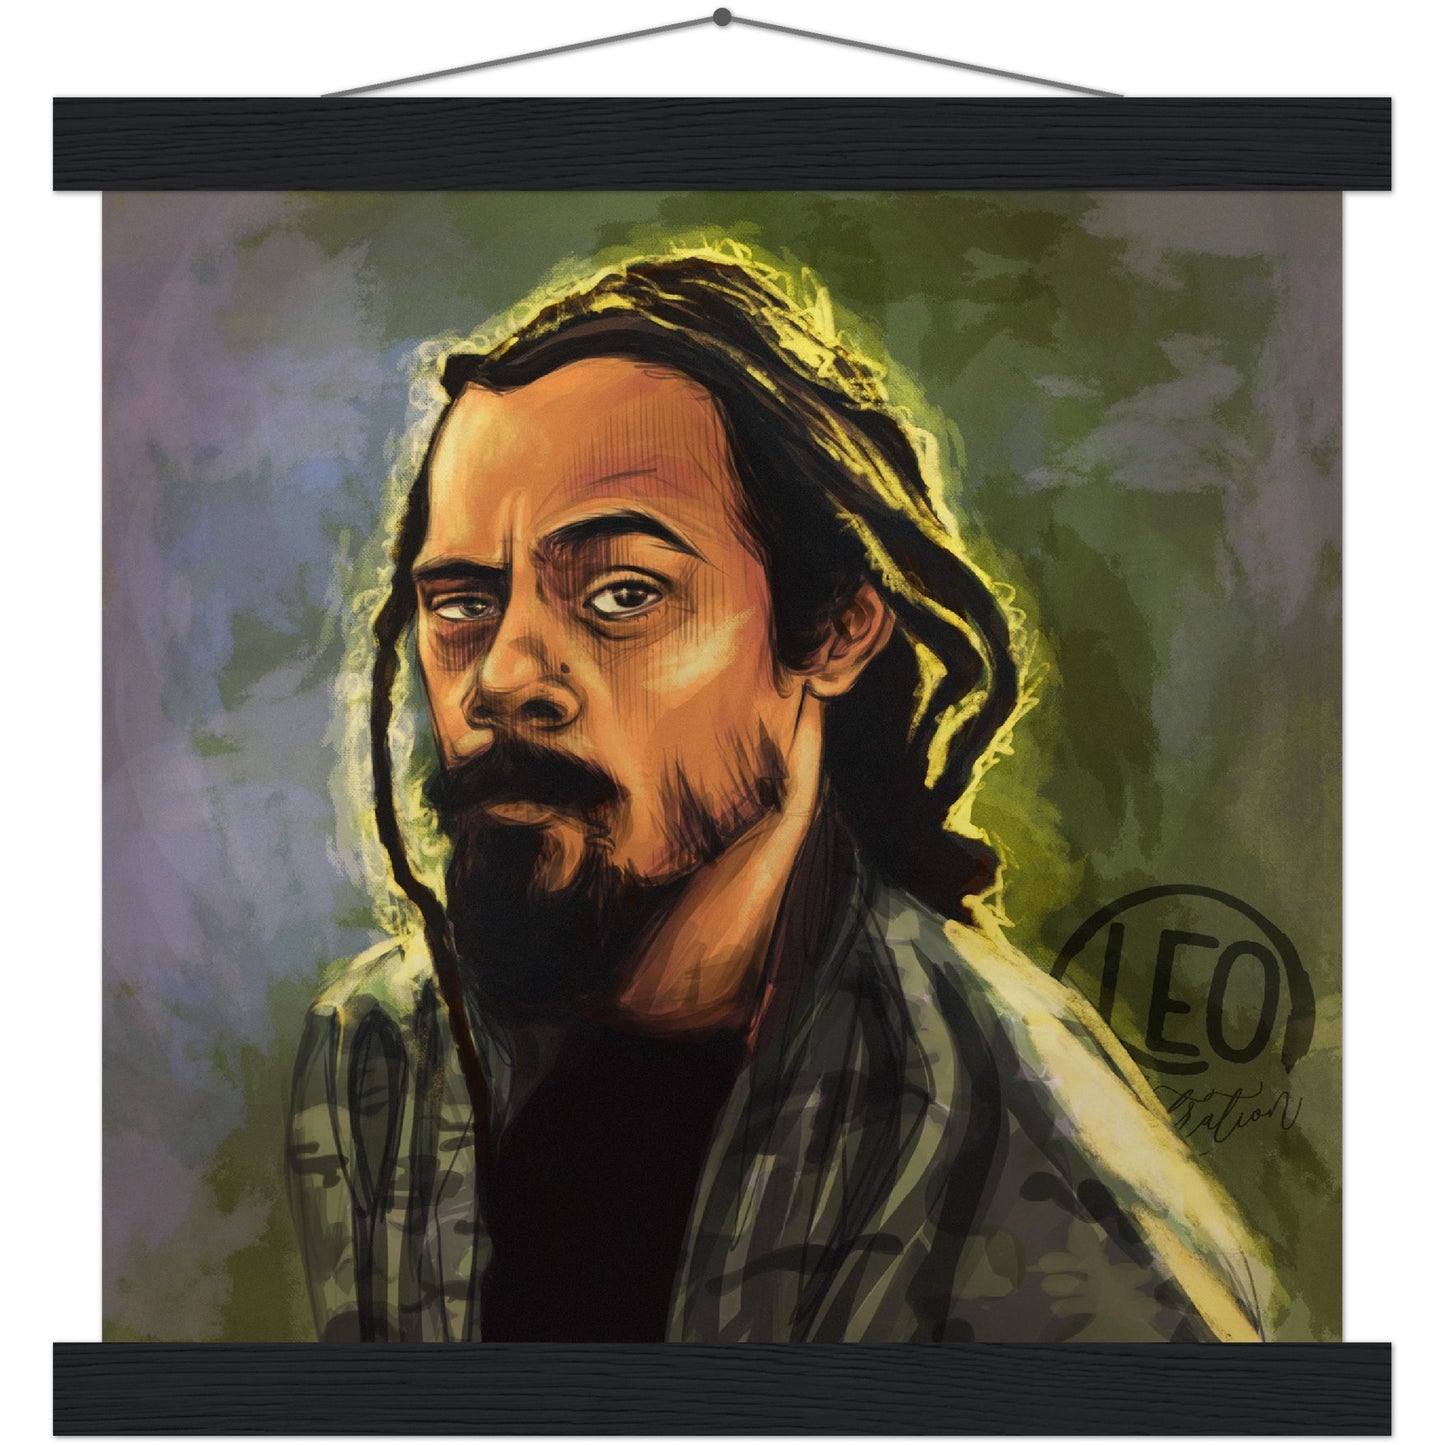 Damian Marley art portrait from Leonora, print it on a fine poster in good quality!